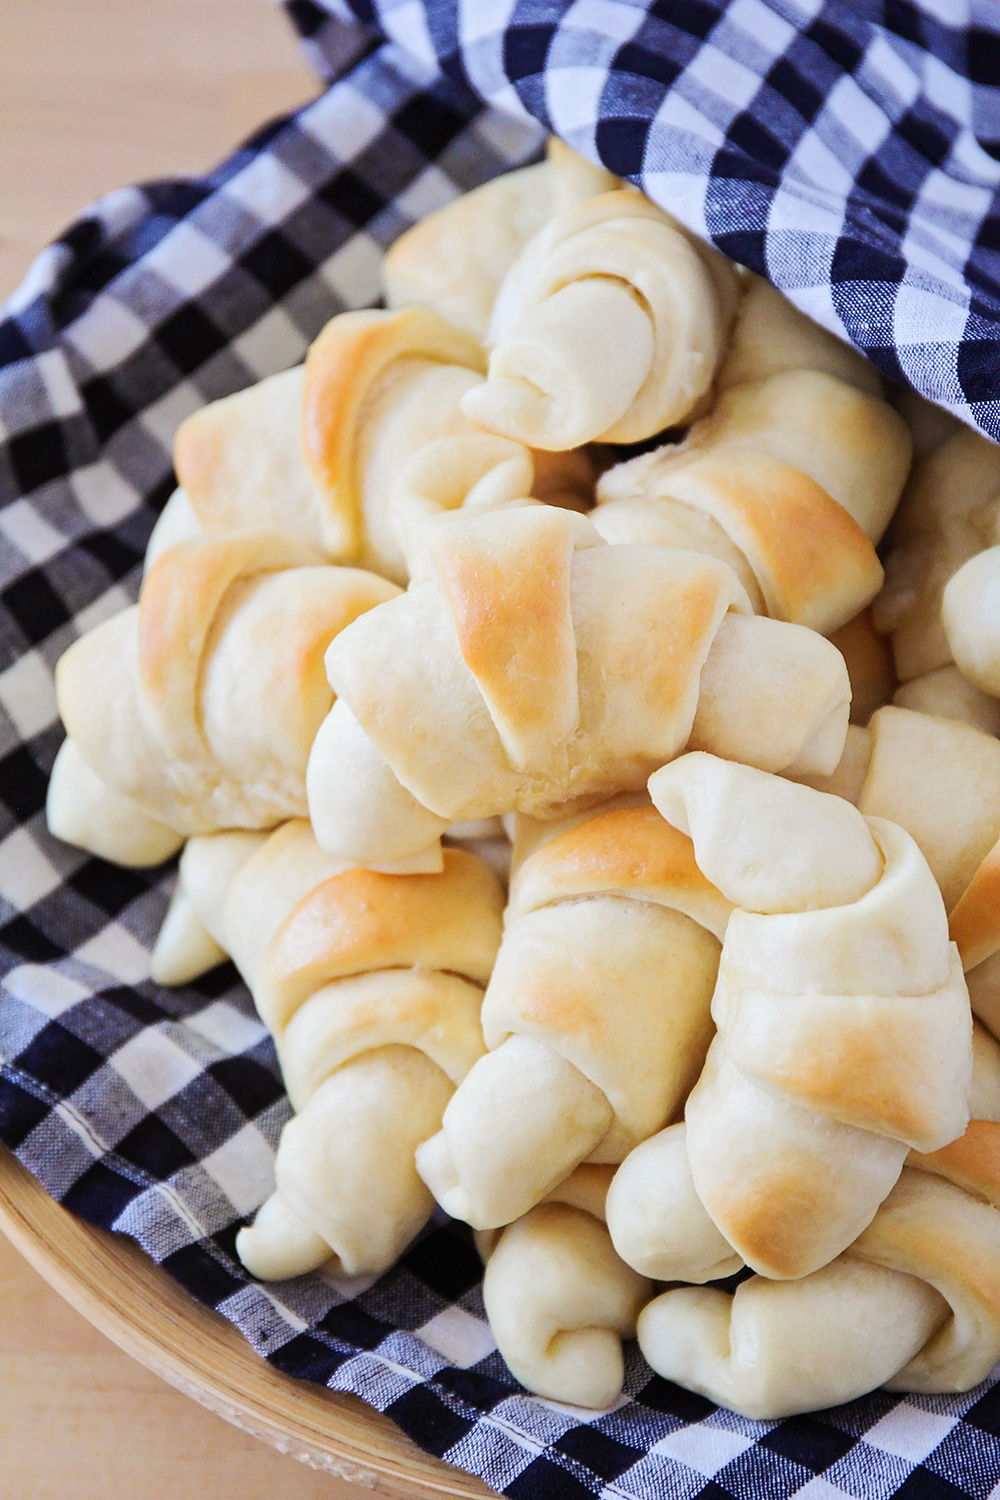 These one hour crescent rolls are so light and fluffy, and so easy to make, too!